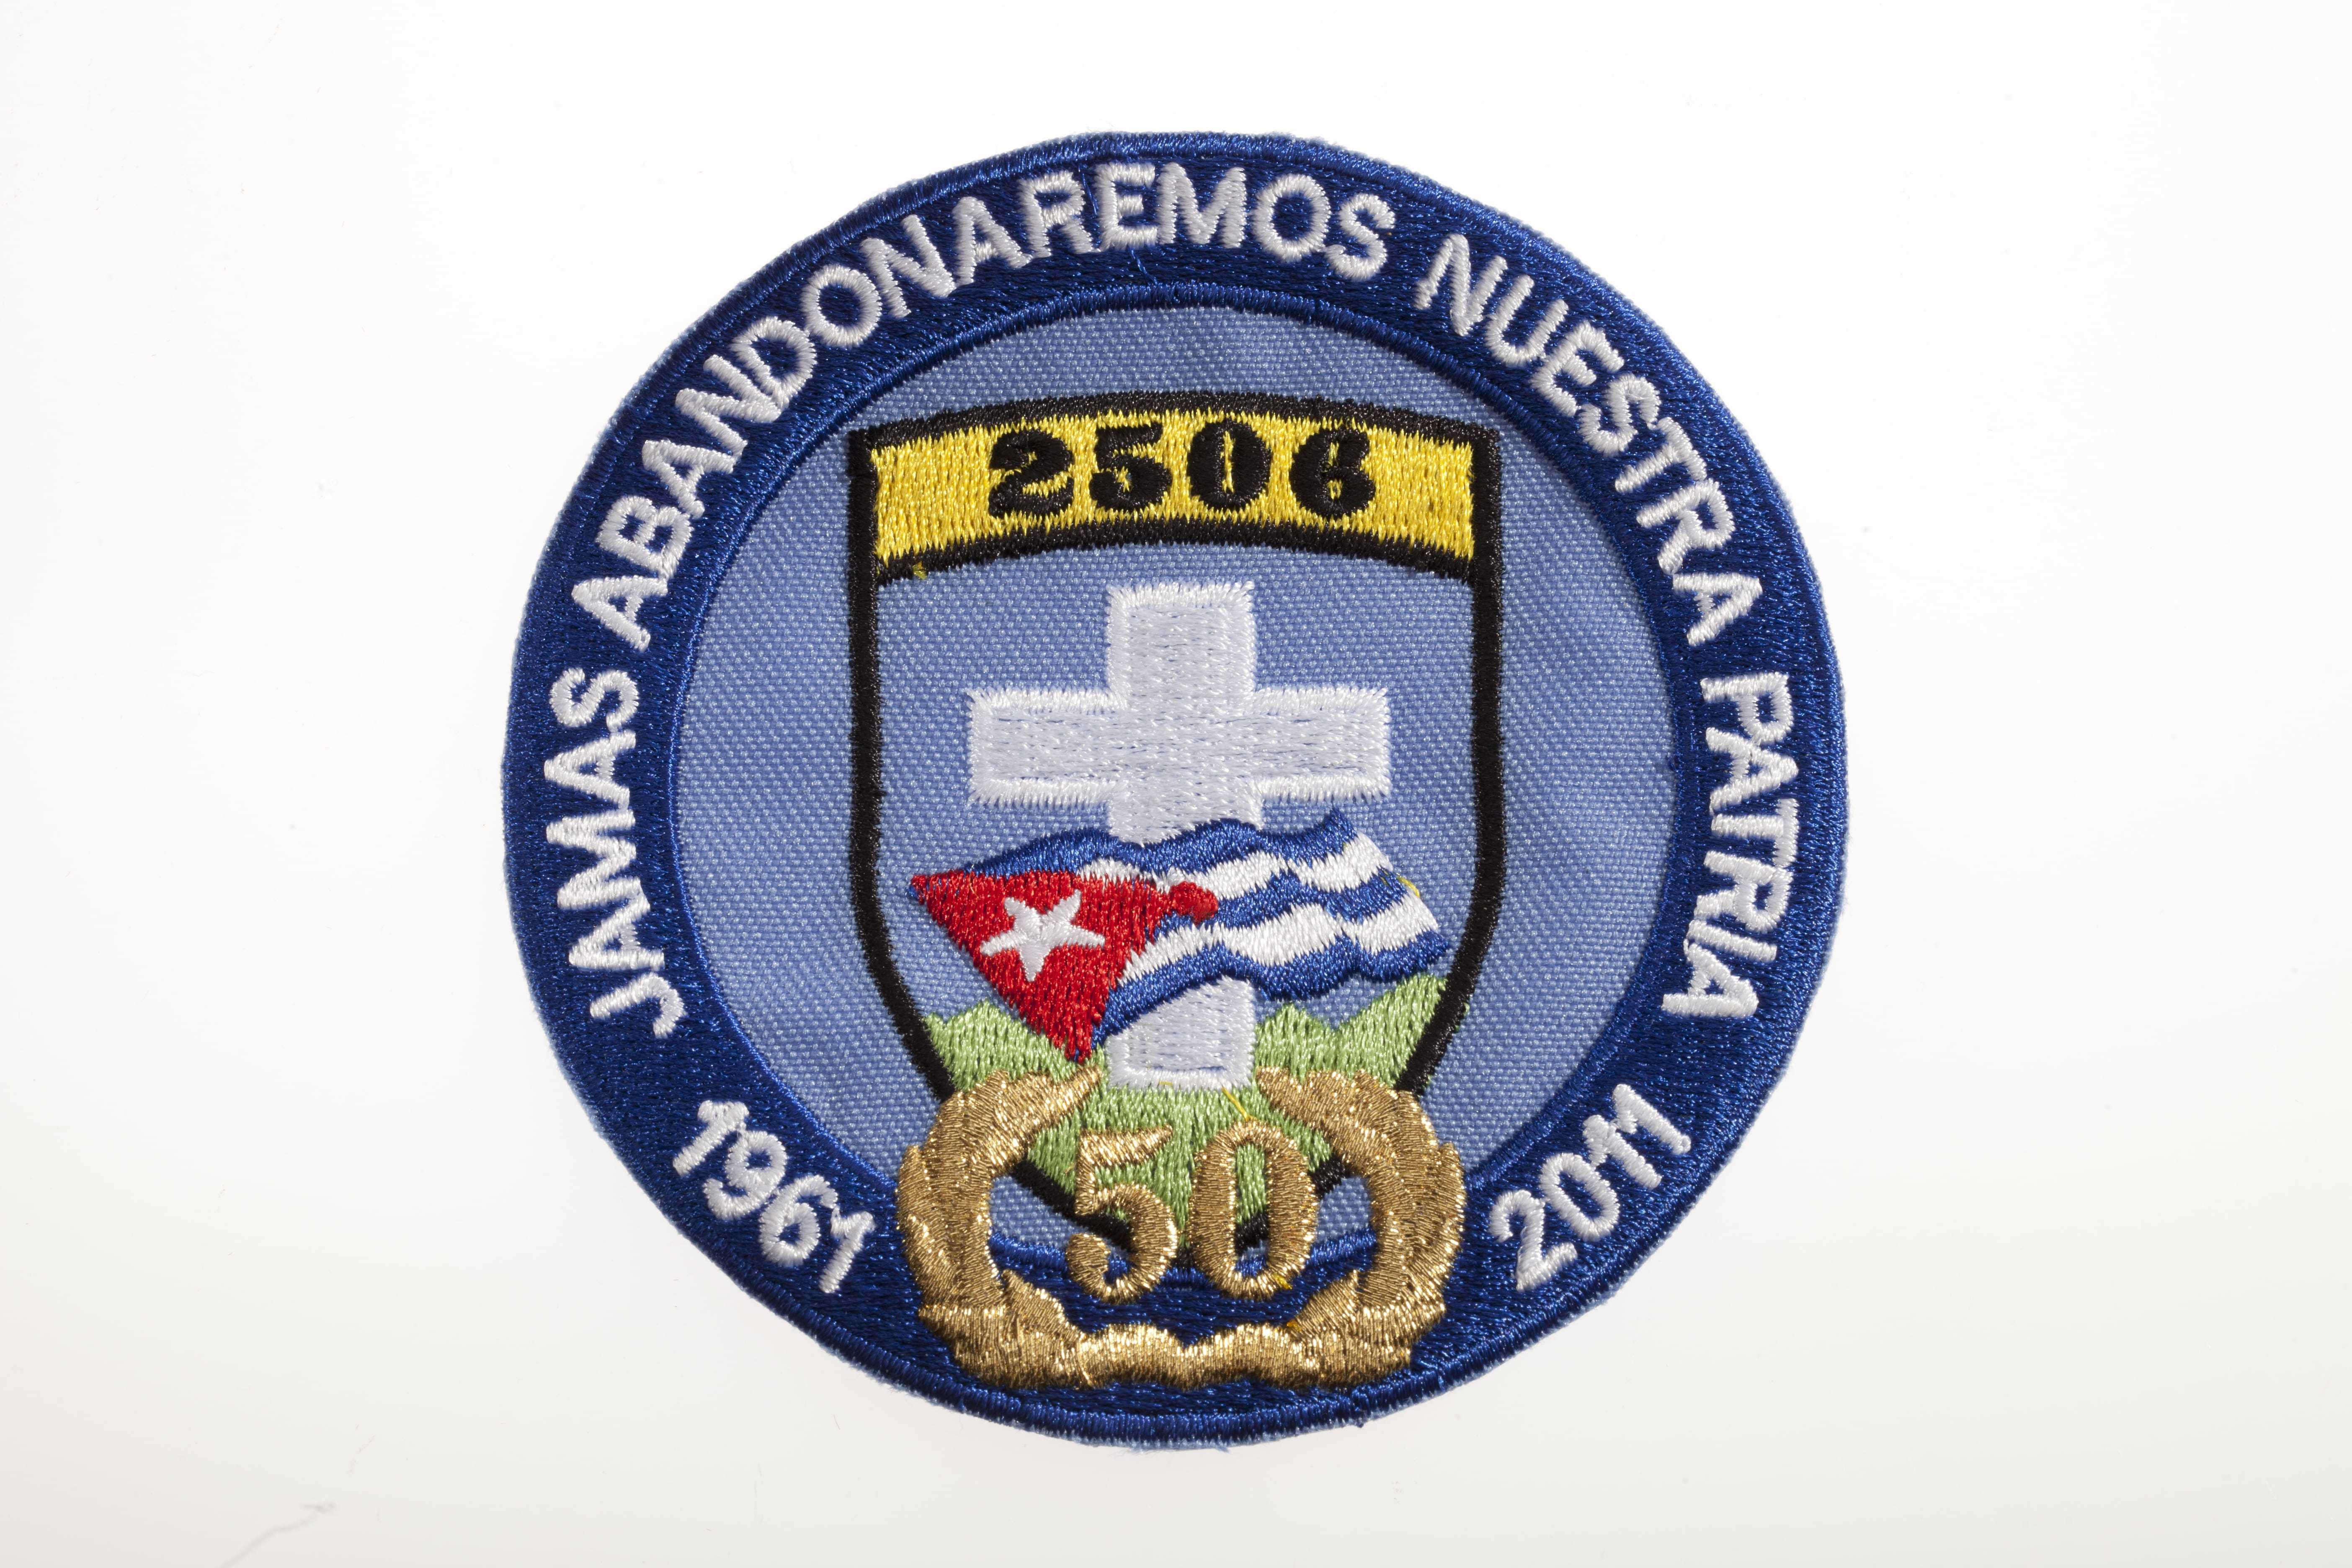 A blue circular patch with a Cuban flag and a cross in the center. The dates 1961 and 2011 are placed on opposite sides of the number 50.